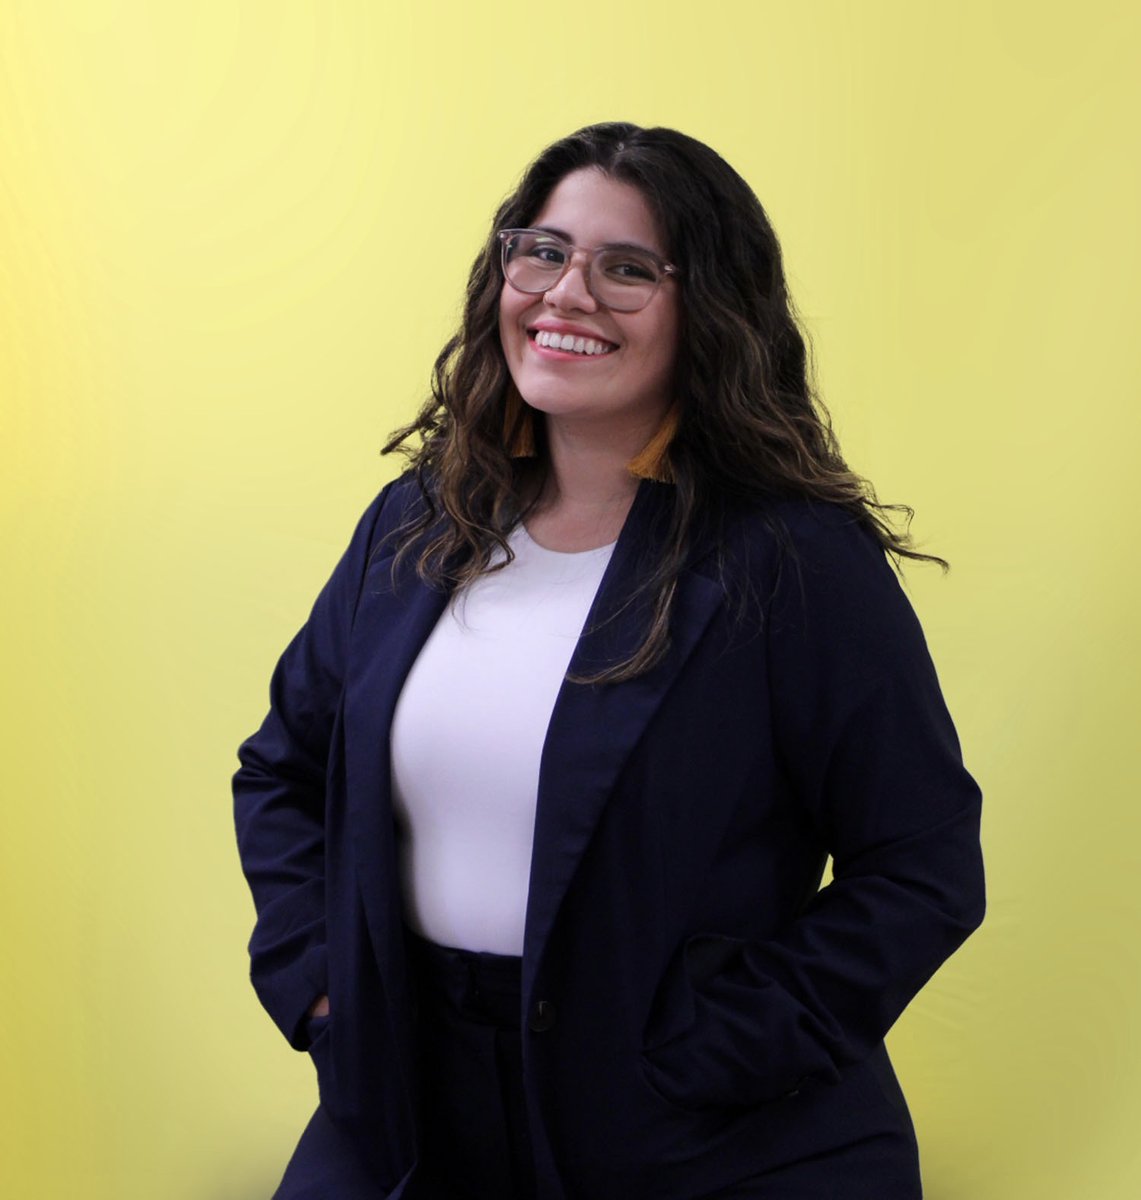 Please join us in welcoming Fabiola Barreto, our new Texas Immigrant Worker Project Coordinator 🥳 She will organize our Citizenship Clinics, assist in other immigration-related initiatives, and participate in immigration-related legislative activities. Welcome, Fabiola!